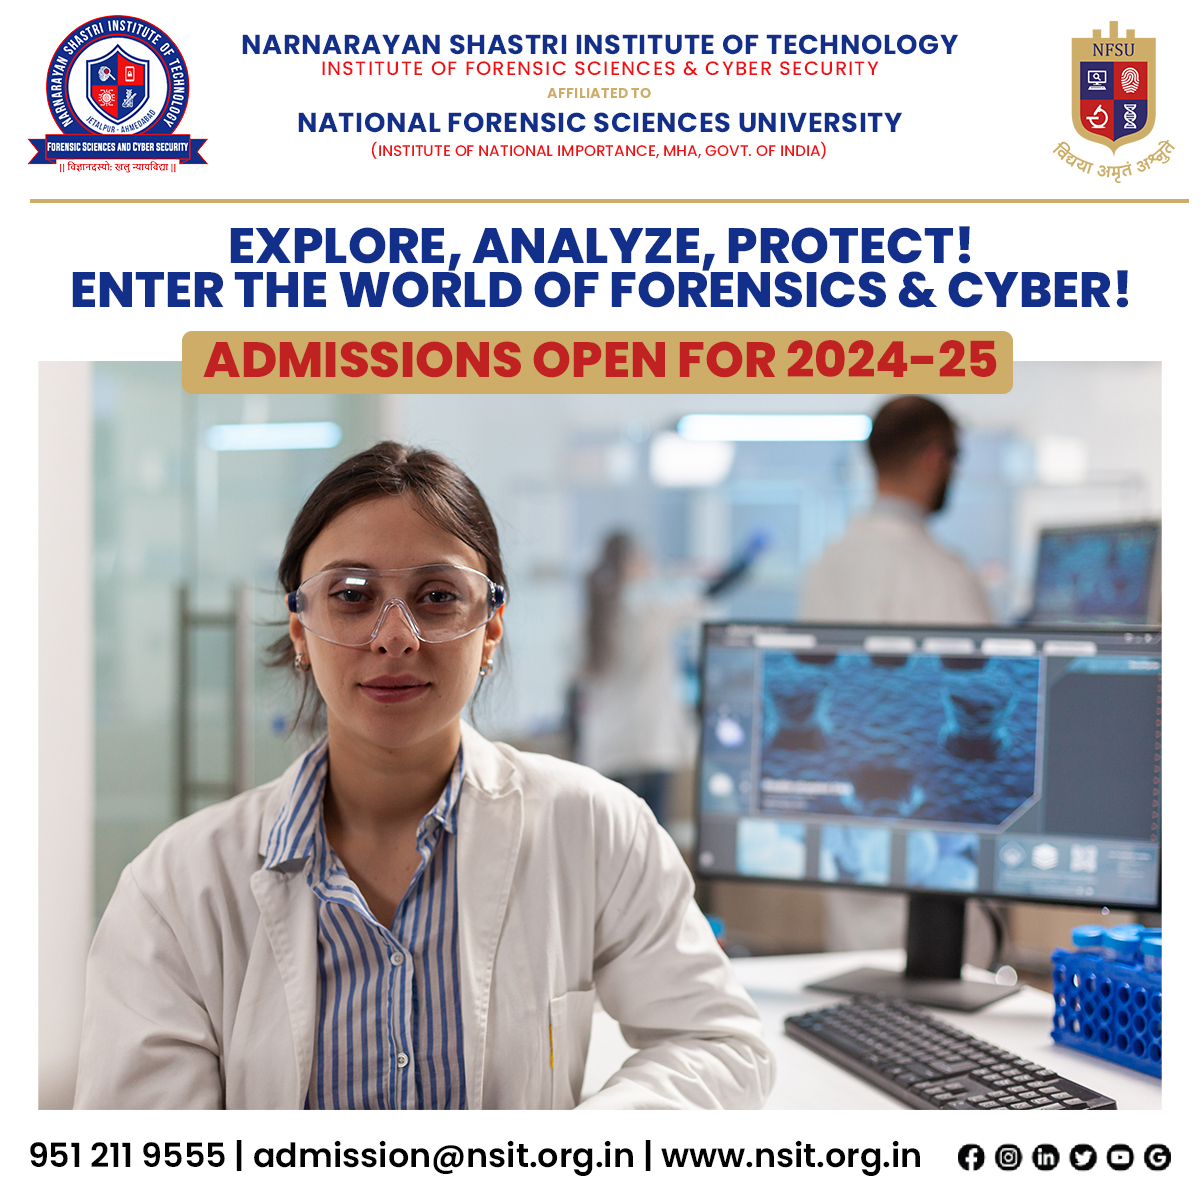 A trailblazing world of forensics & cyber is waiting for you!

#nsit #nsitjetalpur #digitalforensics #cybersecurity #ForensicScience #forensics #ahmedabad #AdmissionOpen #ifscs #security #technology #cybercrime #privacy #college #student #education #students #studentlife